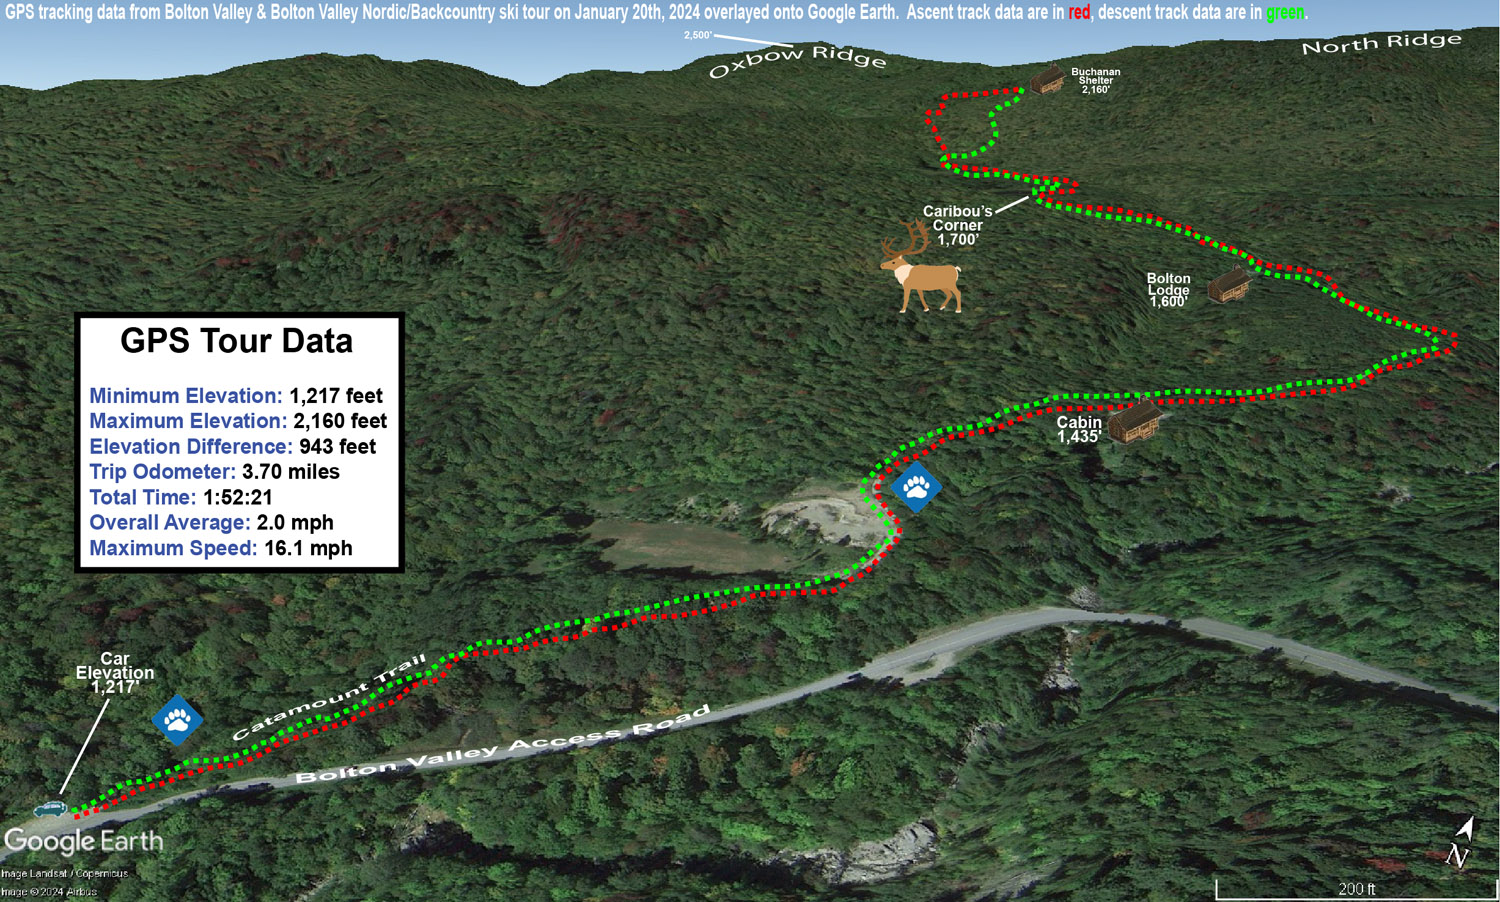 A Google Earth map with GPS tracking data of a ski tour up to the Buchanan Shelter on the Nordic and Backcountry Network at Bolton Valley Ski Resort in Vermont